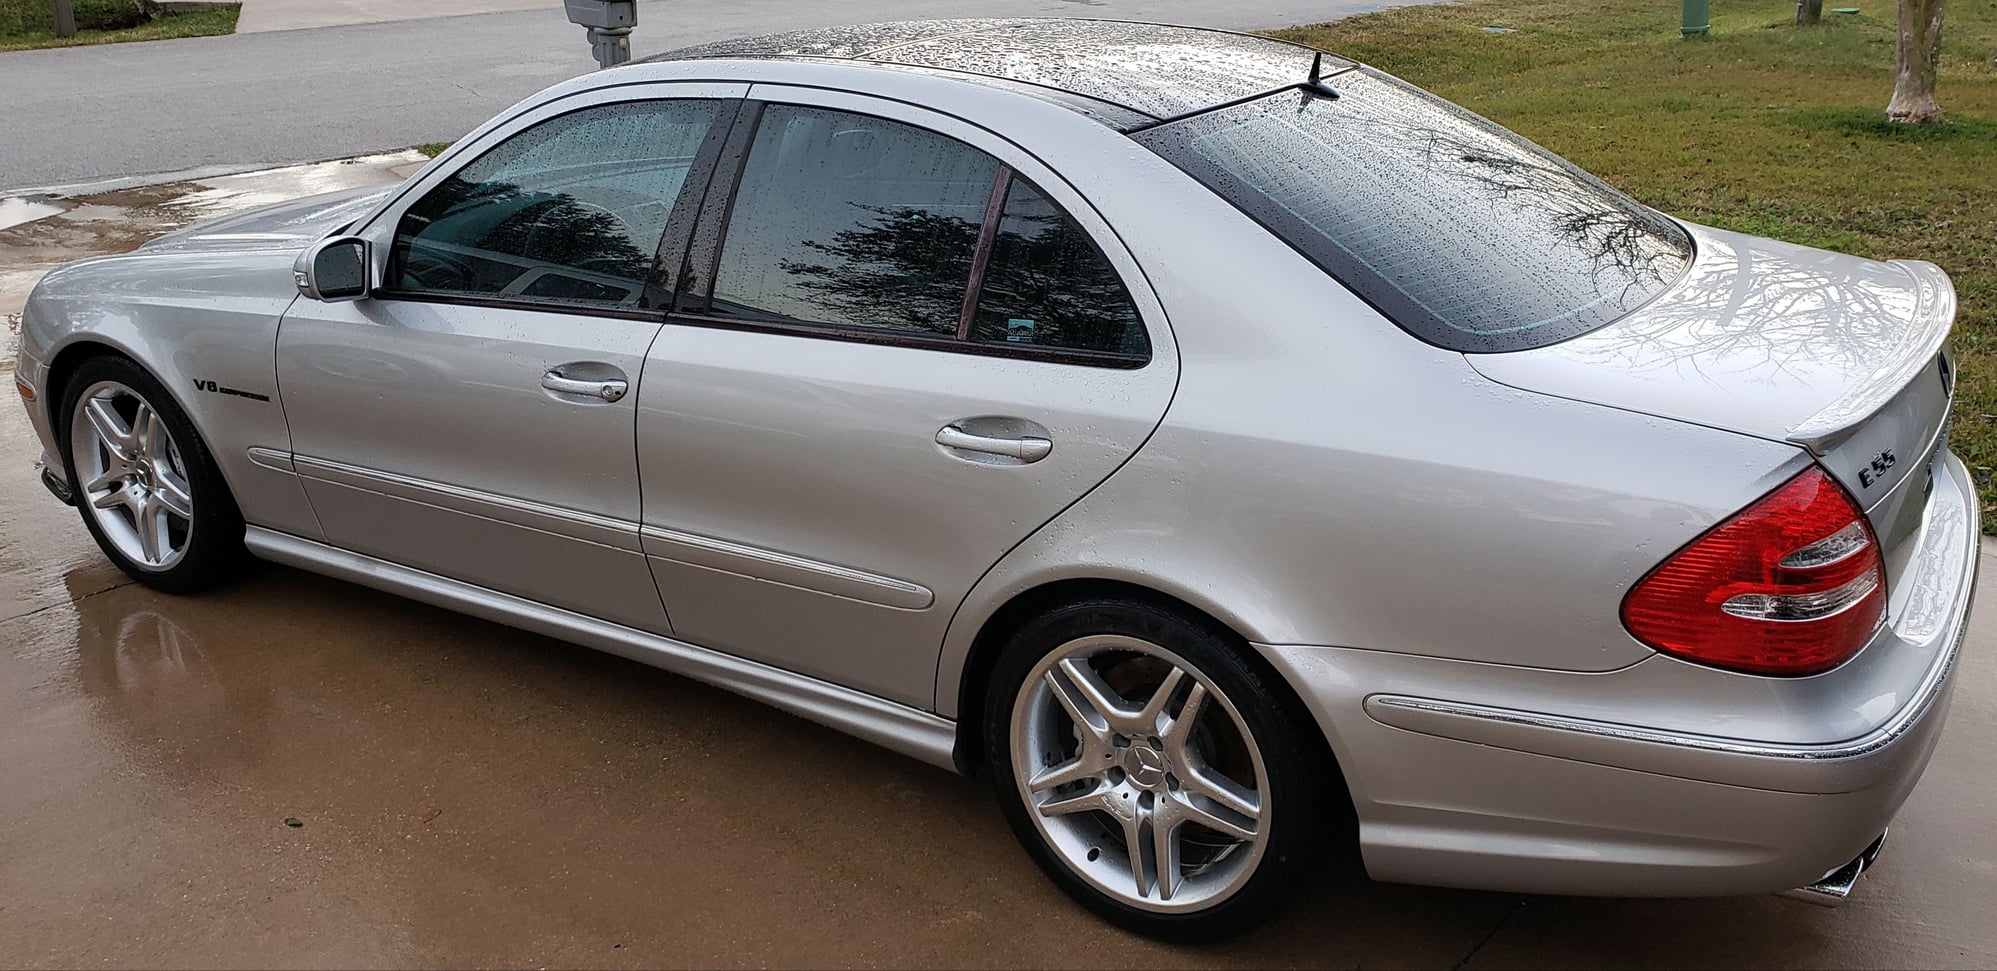 2003 Mercedes-Benz E55 AMG - 2003 E55 AMG 56k Very Clean, Stock, Never abused, Adult owned. - Used - VIN WDBUF76J53A379857 - 8 cyl - 2WD - Automatic - Sedan - Silver - Palm Coast, FL 32164, United States